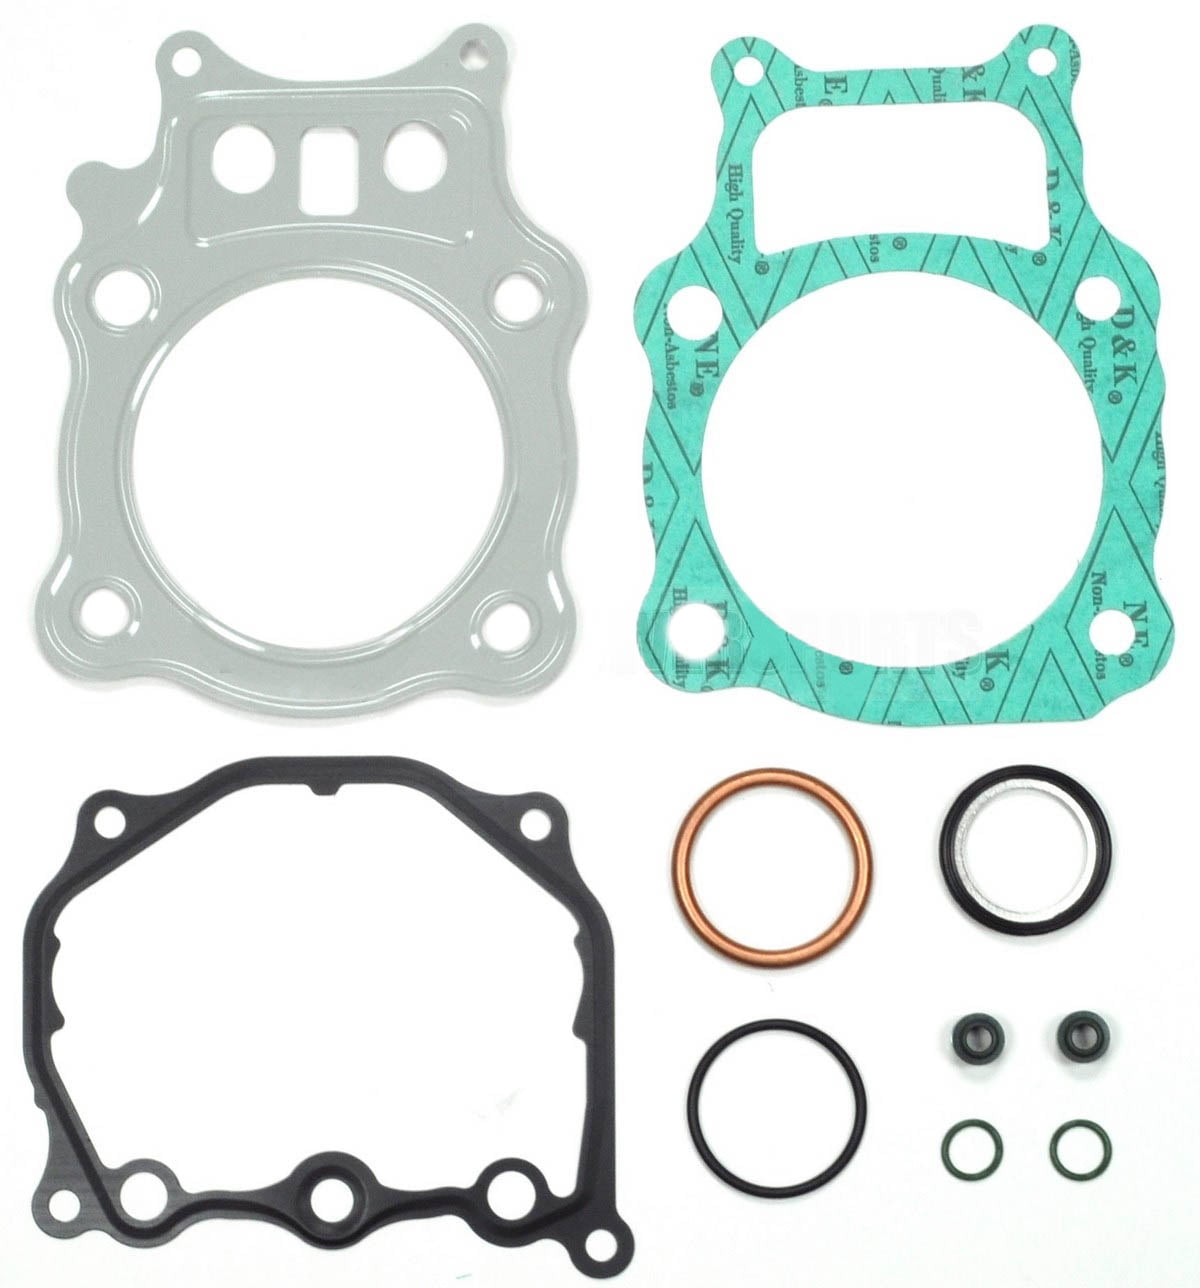 Top End Head Gasket Kits Fit for Rancher 350 TRX 350 2000-2006 